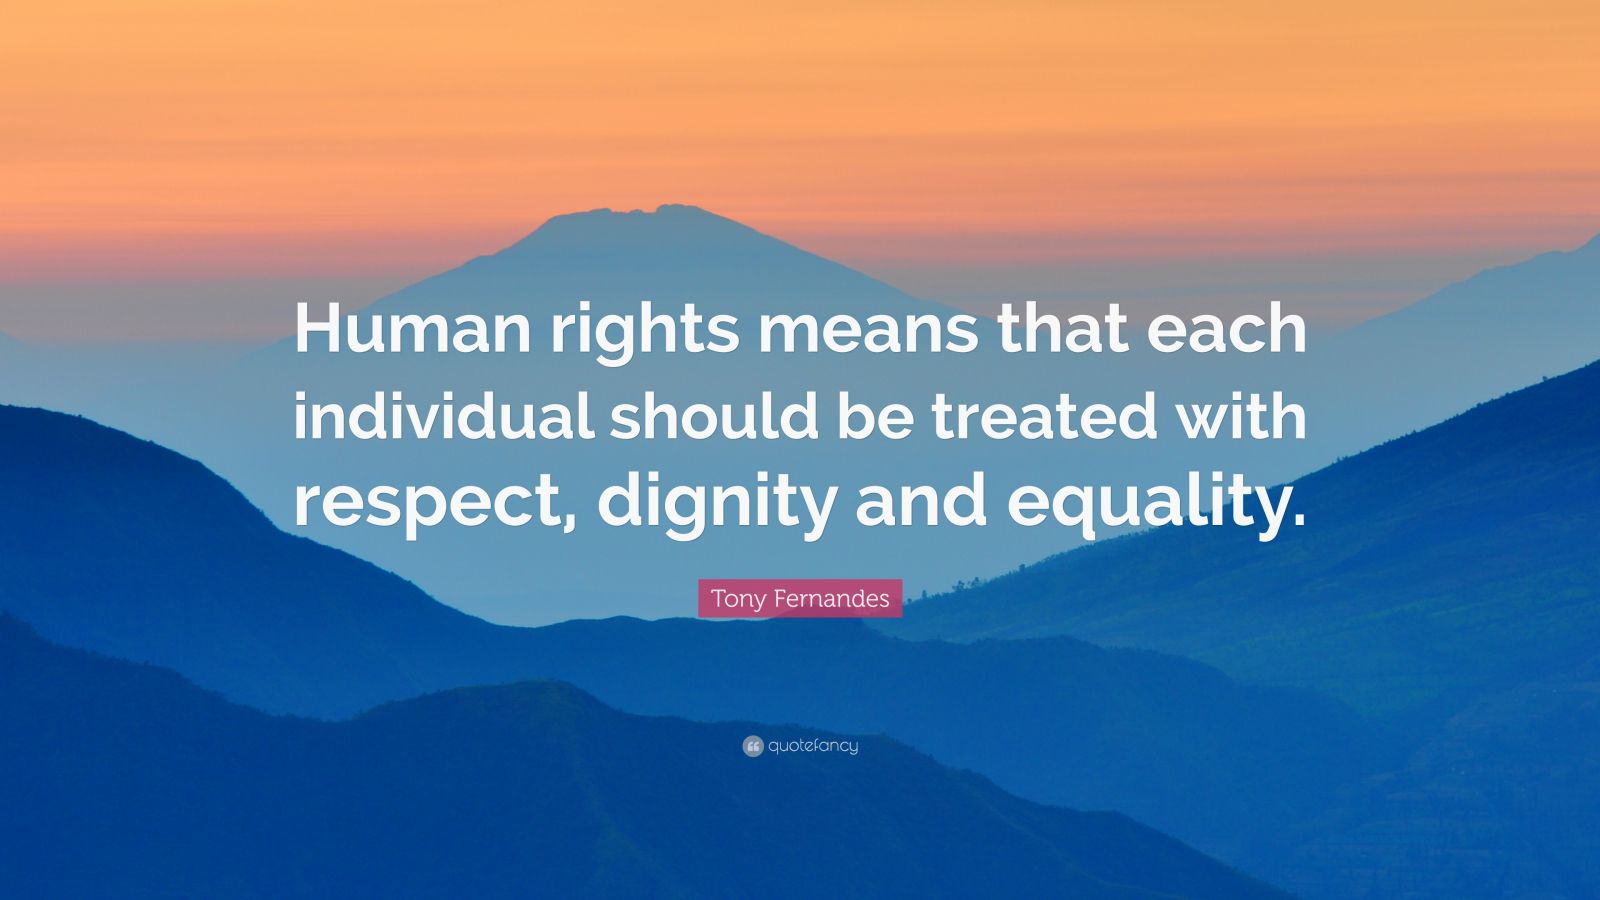 Tony Fernandes Quote: “Human rights means that each individual should